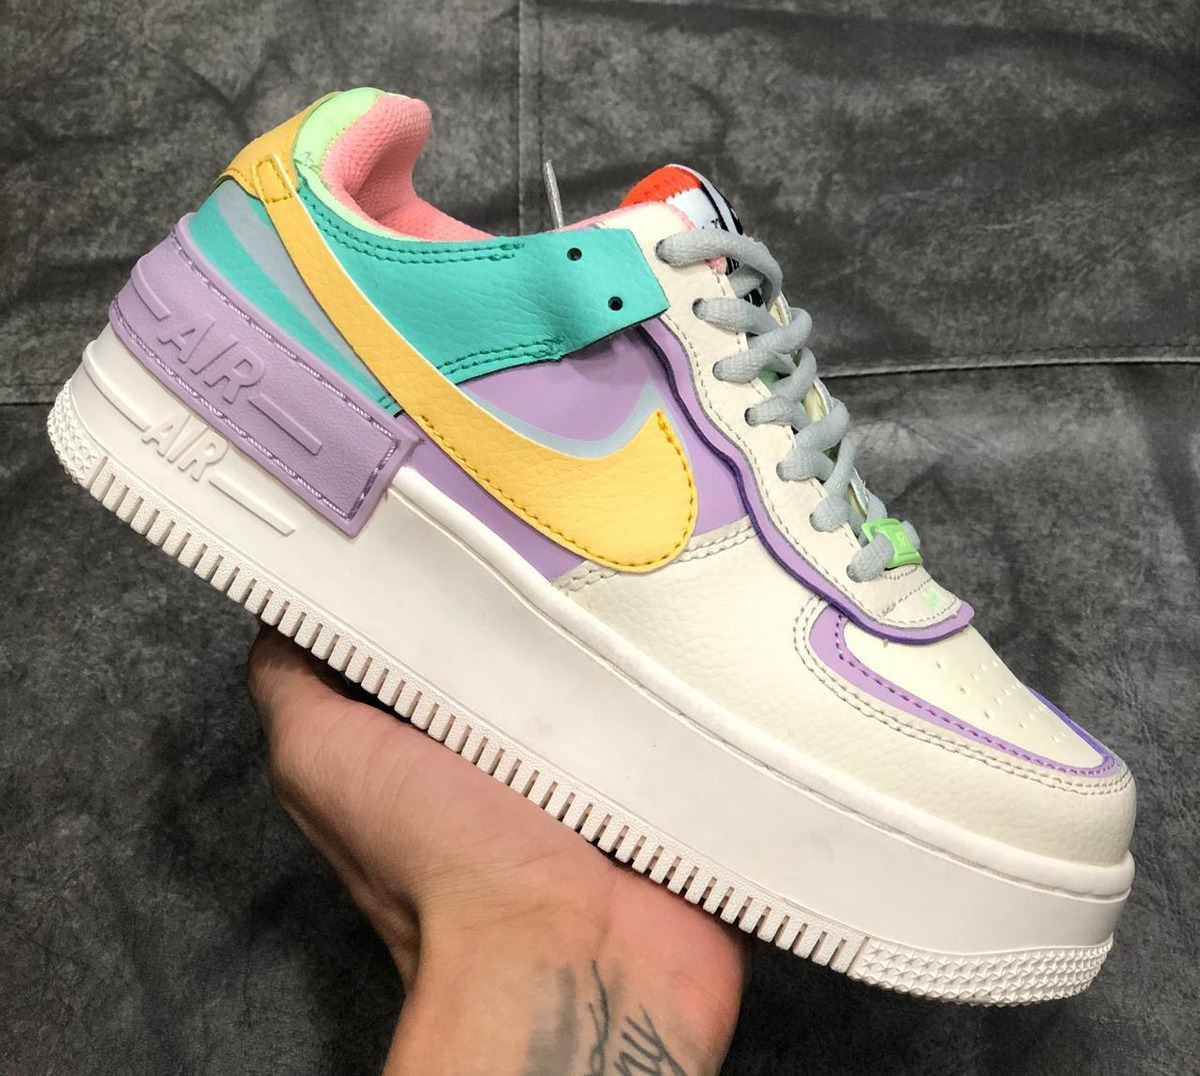 nike air force colours